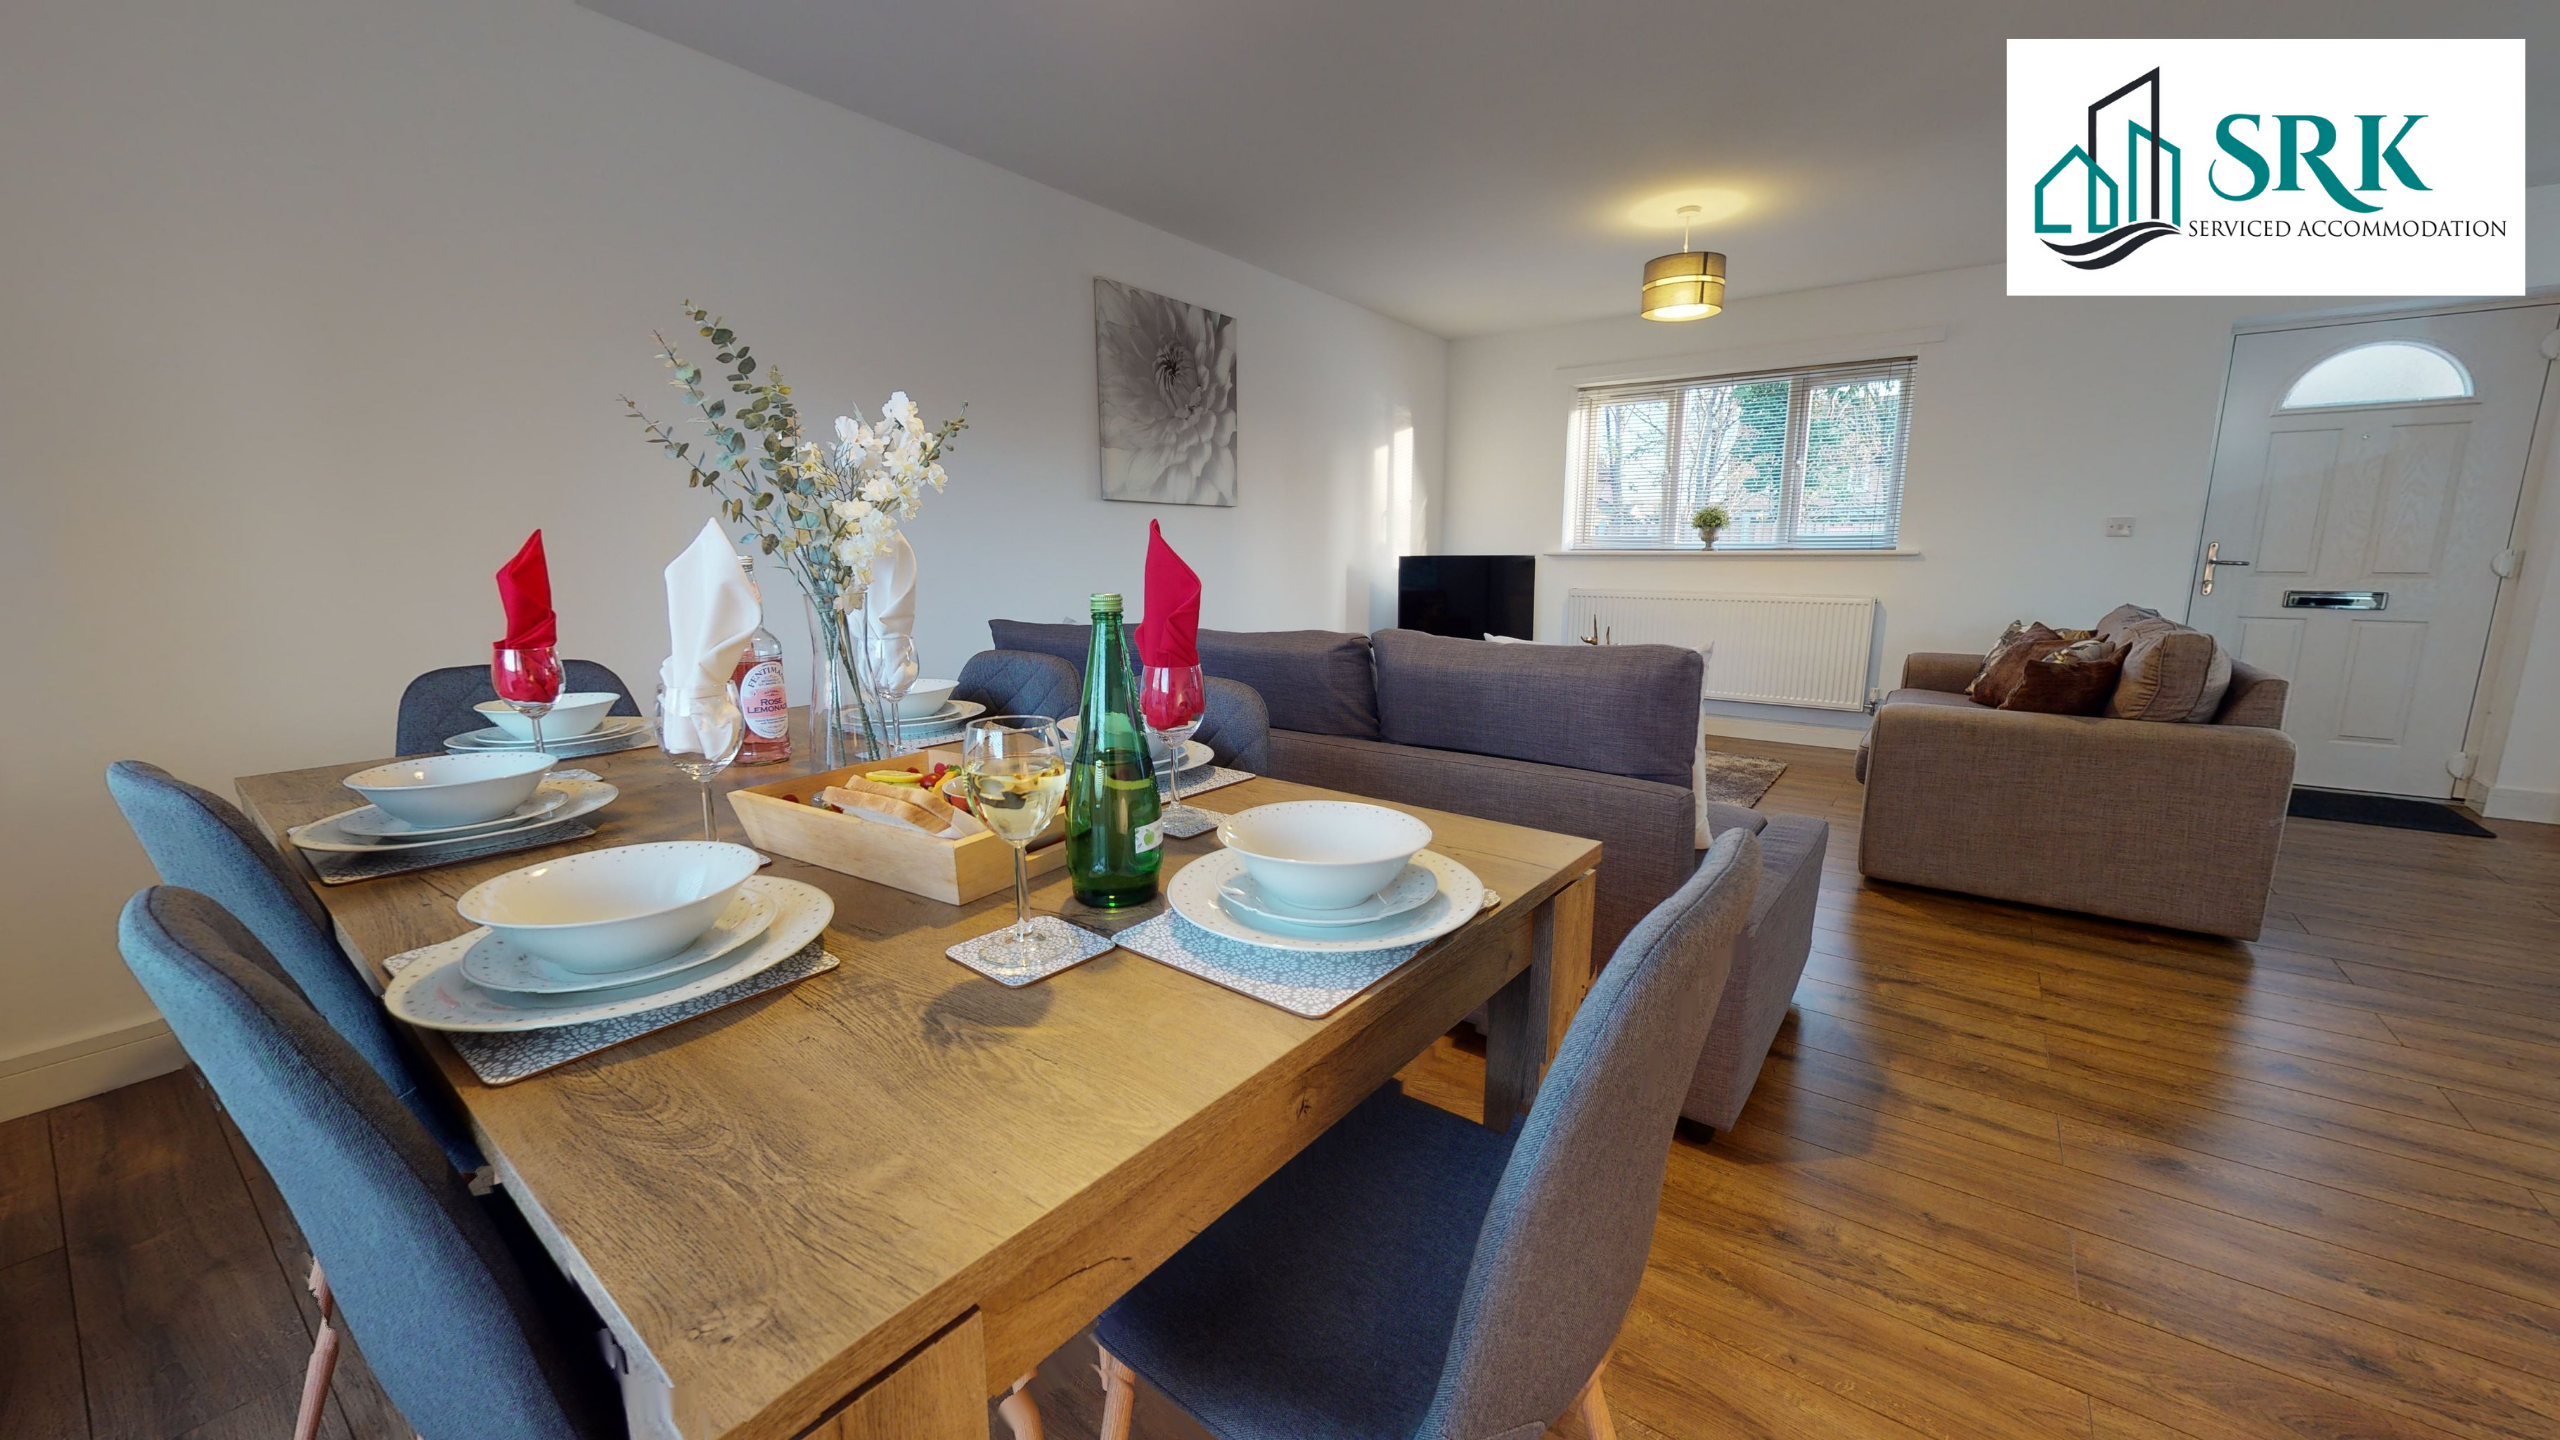 Get Top Peterborough, UK Serviced Accommodation For Family & Corporate Needs